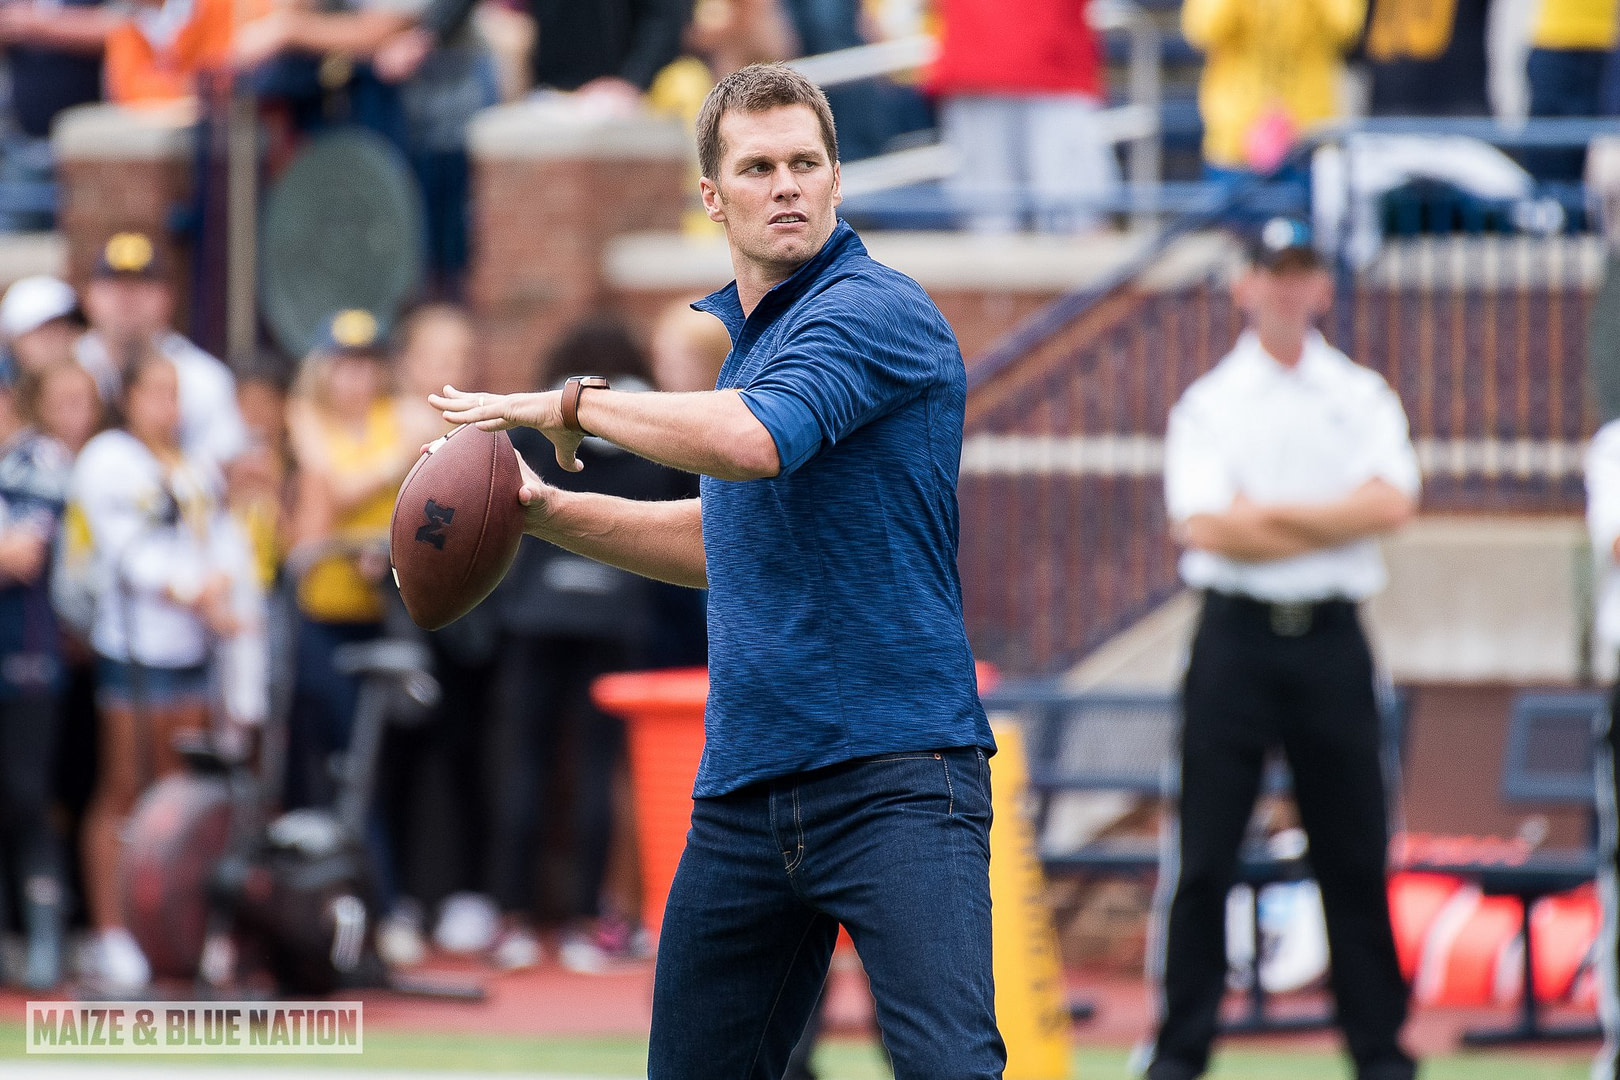 Tom Brady plays catch with Head Coach Jim Harbaugh  before Michigan's 45-28 victory over Colorado on September 17, 2016. (James Coller/Maize and Blue Nation)